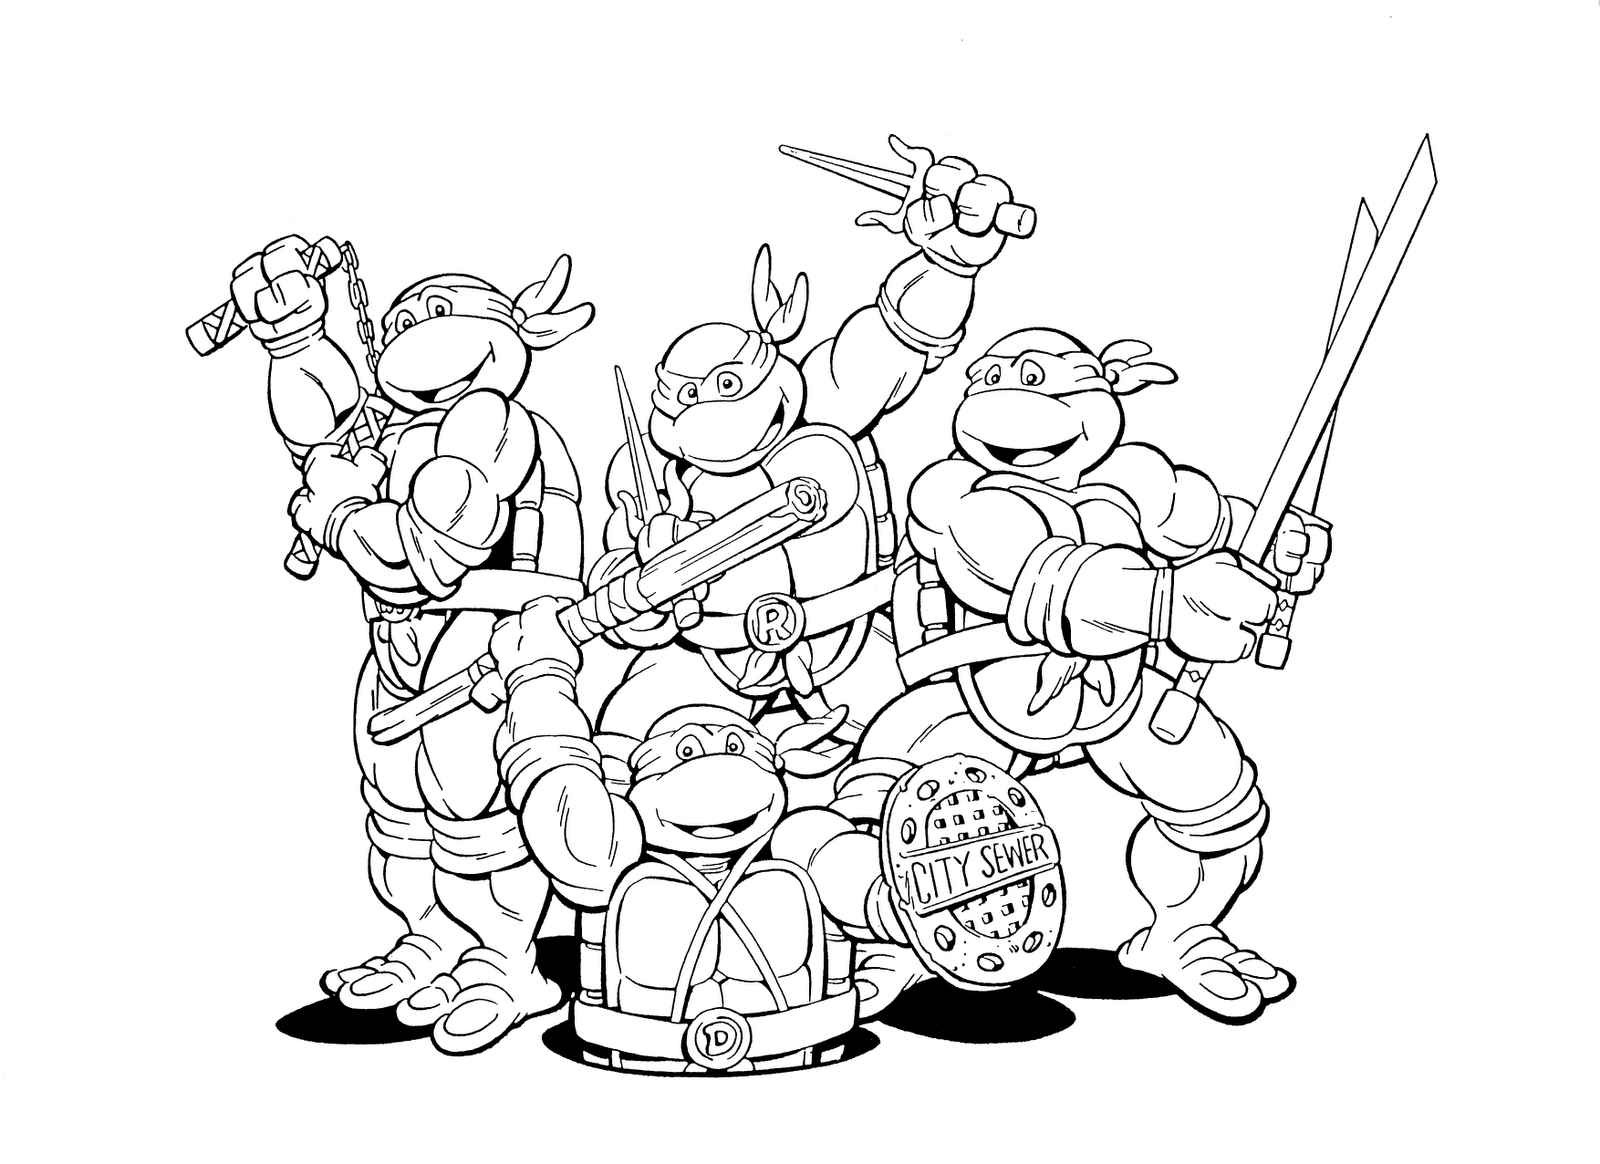 Free Coloring Pages For Boys Turtle
 Teenage Mutant Ninja Turtles Coloring Pages Printable